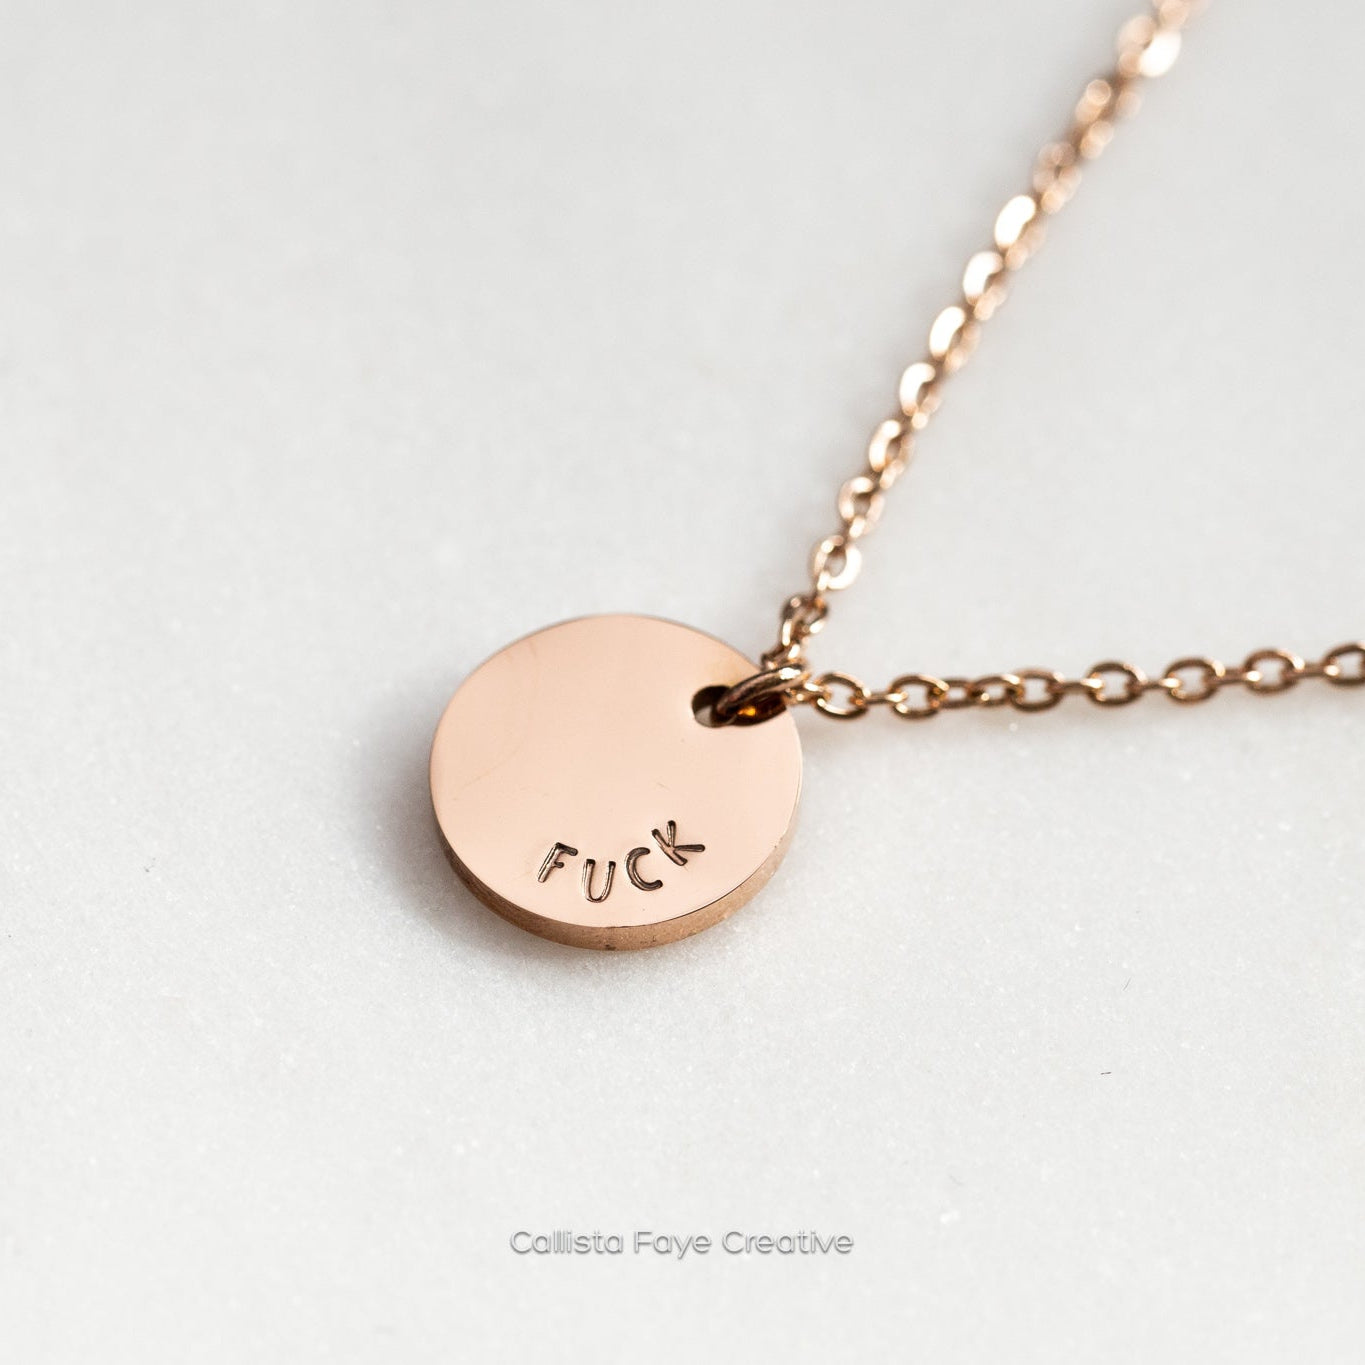 Fuck, Hand Stamped Coin Necklace Necklaces callistafaye Rose Gold  